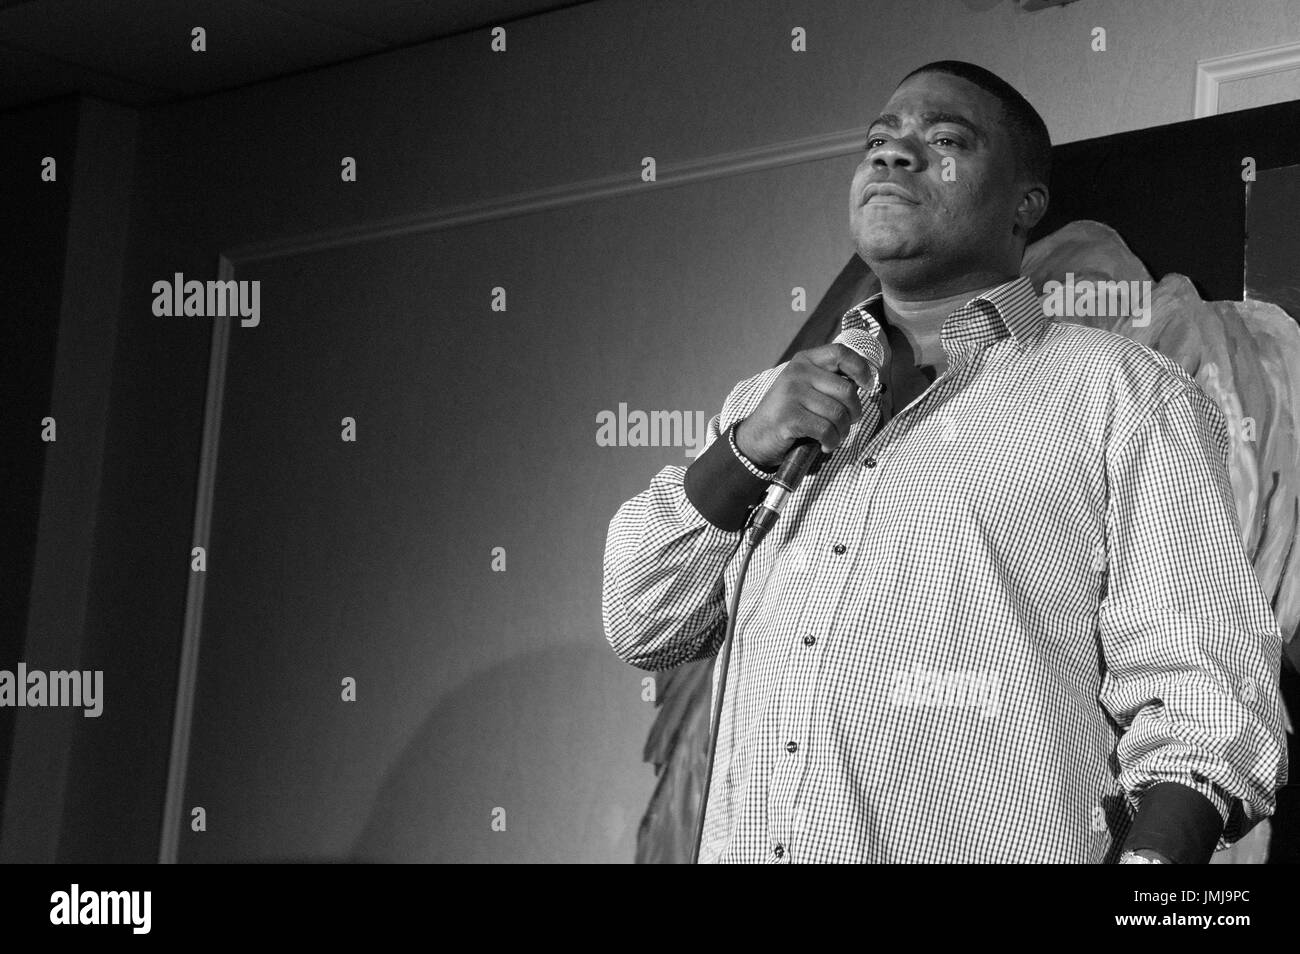 HASBROUCK HEIGHTS, NJ - AUGUST 8:  Tracy Morgan performs stand-up at Bananas Comedy Club in Hasbrouch Heights NJ on August 8, 2013.  Photo: RTPallante / MediaPunch. ***HIGHER RATES APPLY *** Stock Photo